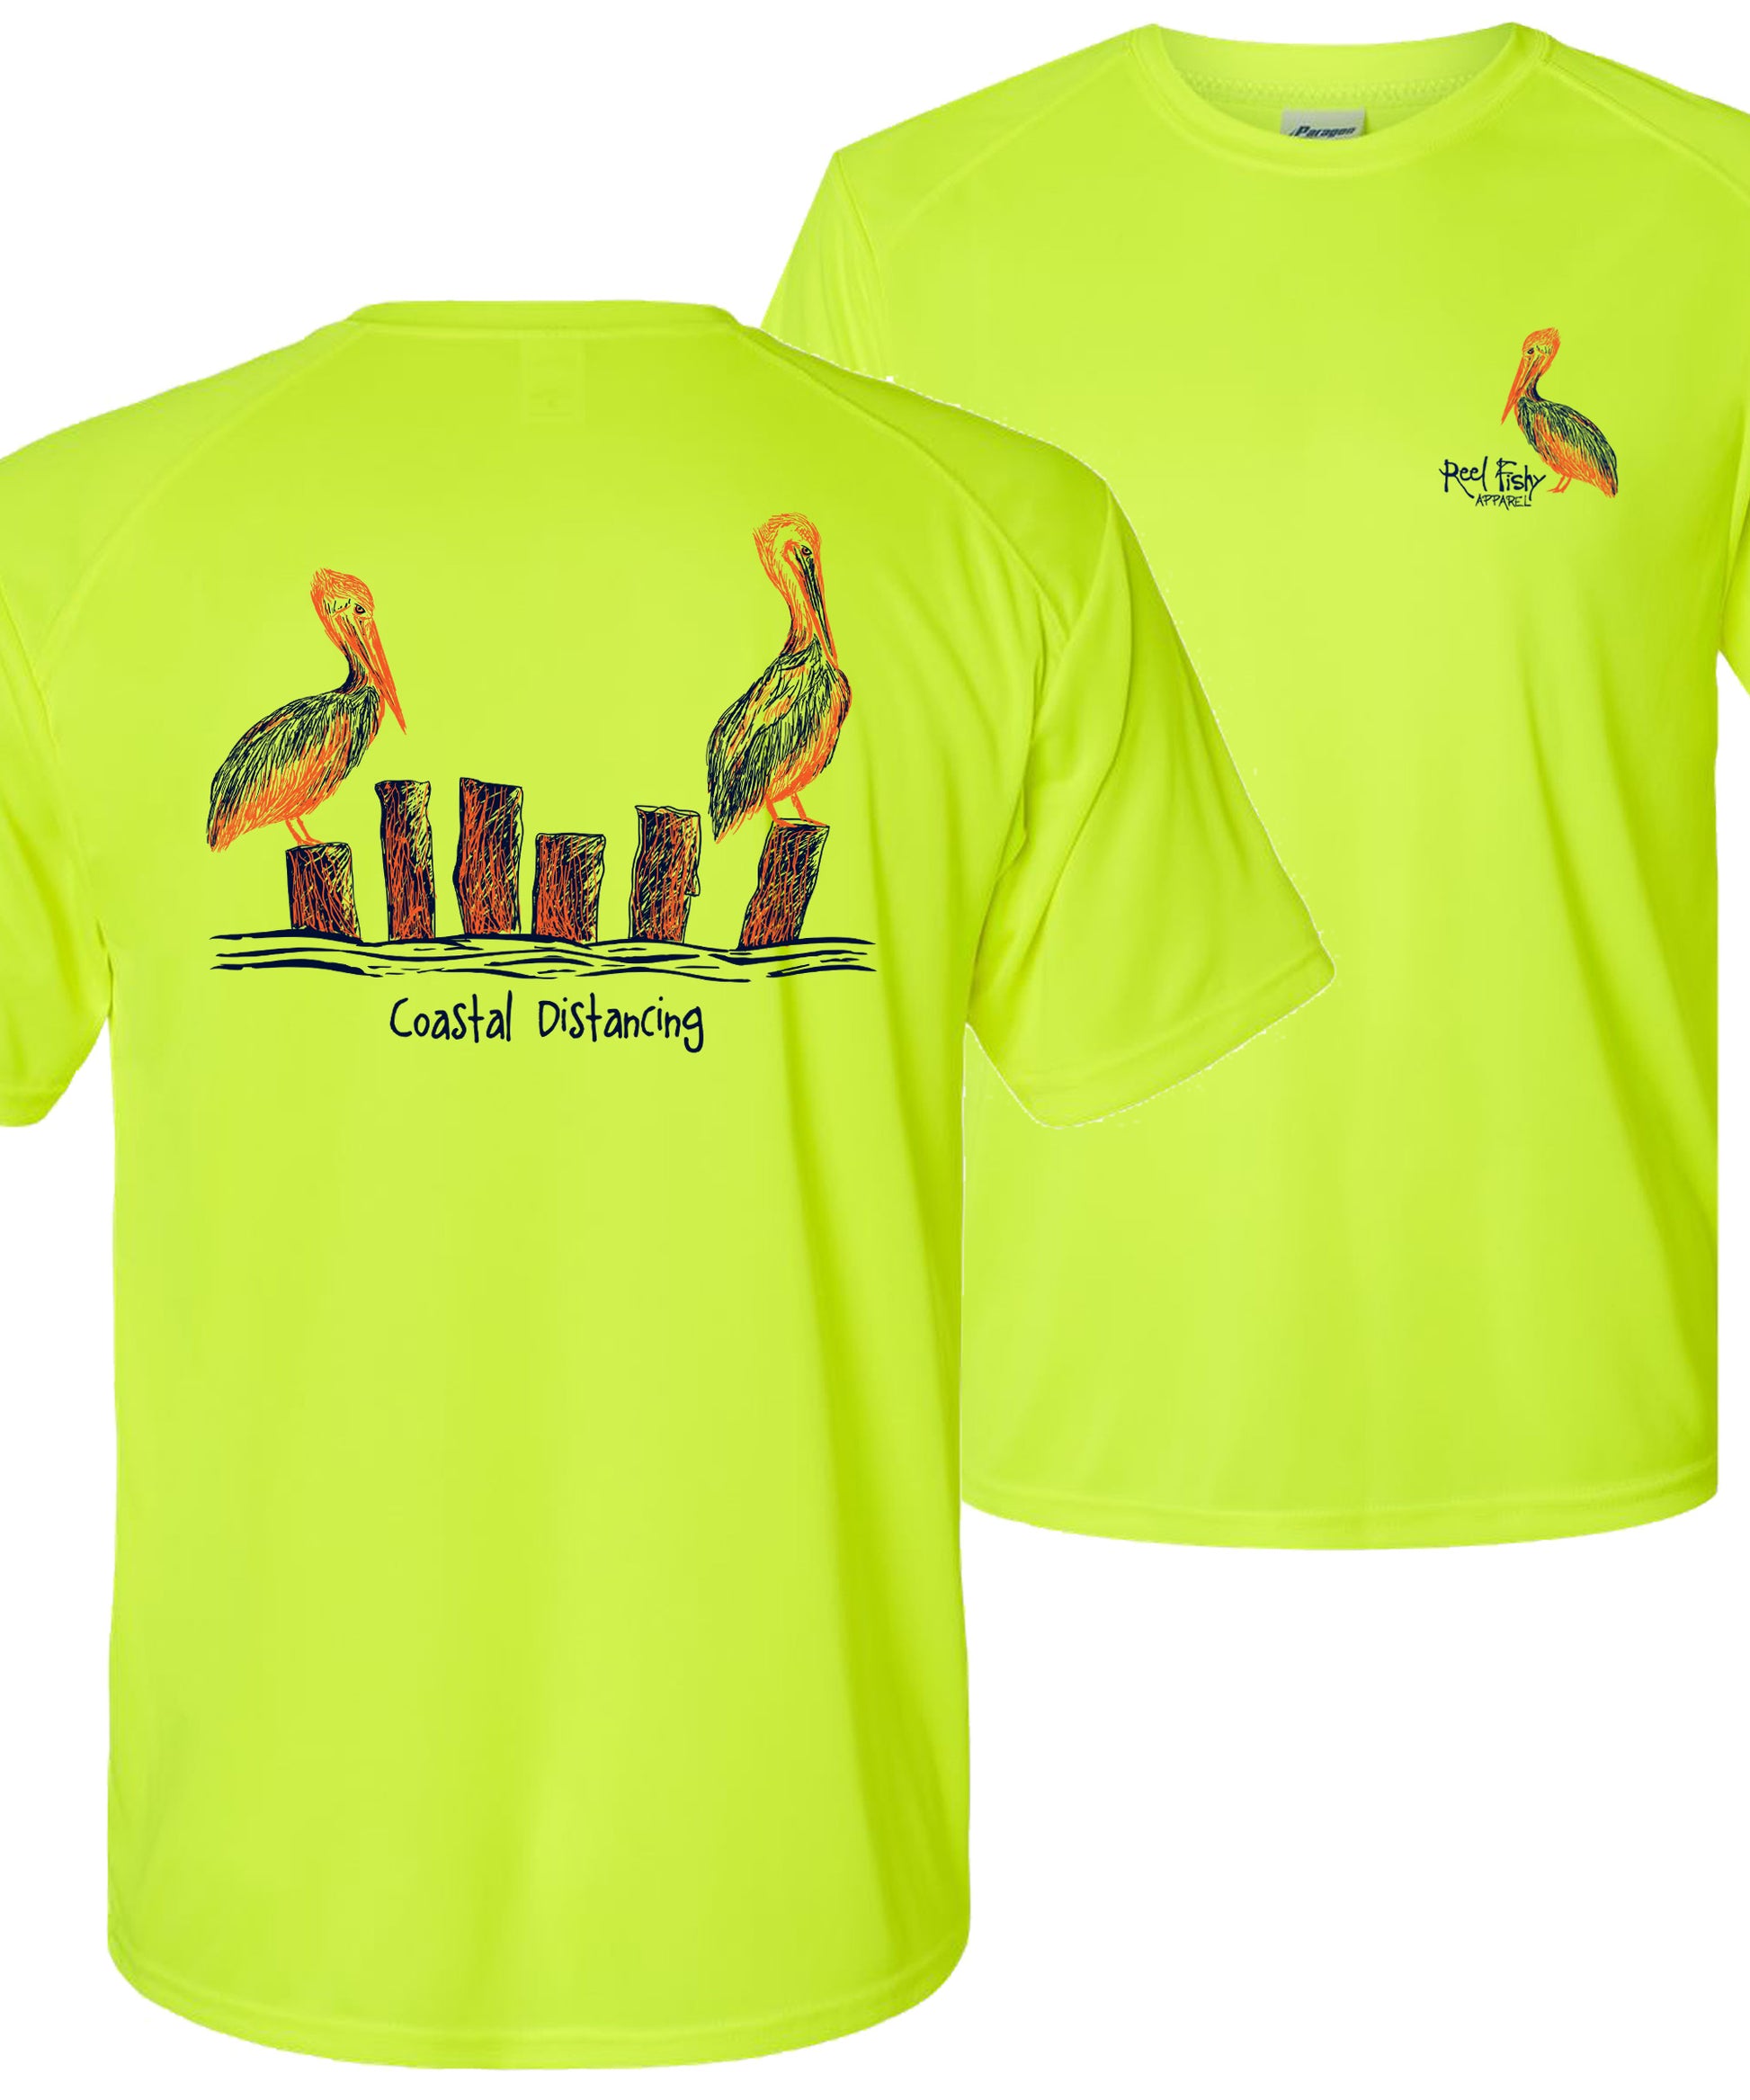 Coastal Performance UPF Apparel Protection Shirts Dry-Fit Fishy – Pelicans Distancing Reel 50+ Sun